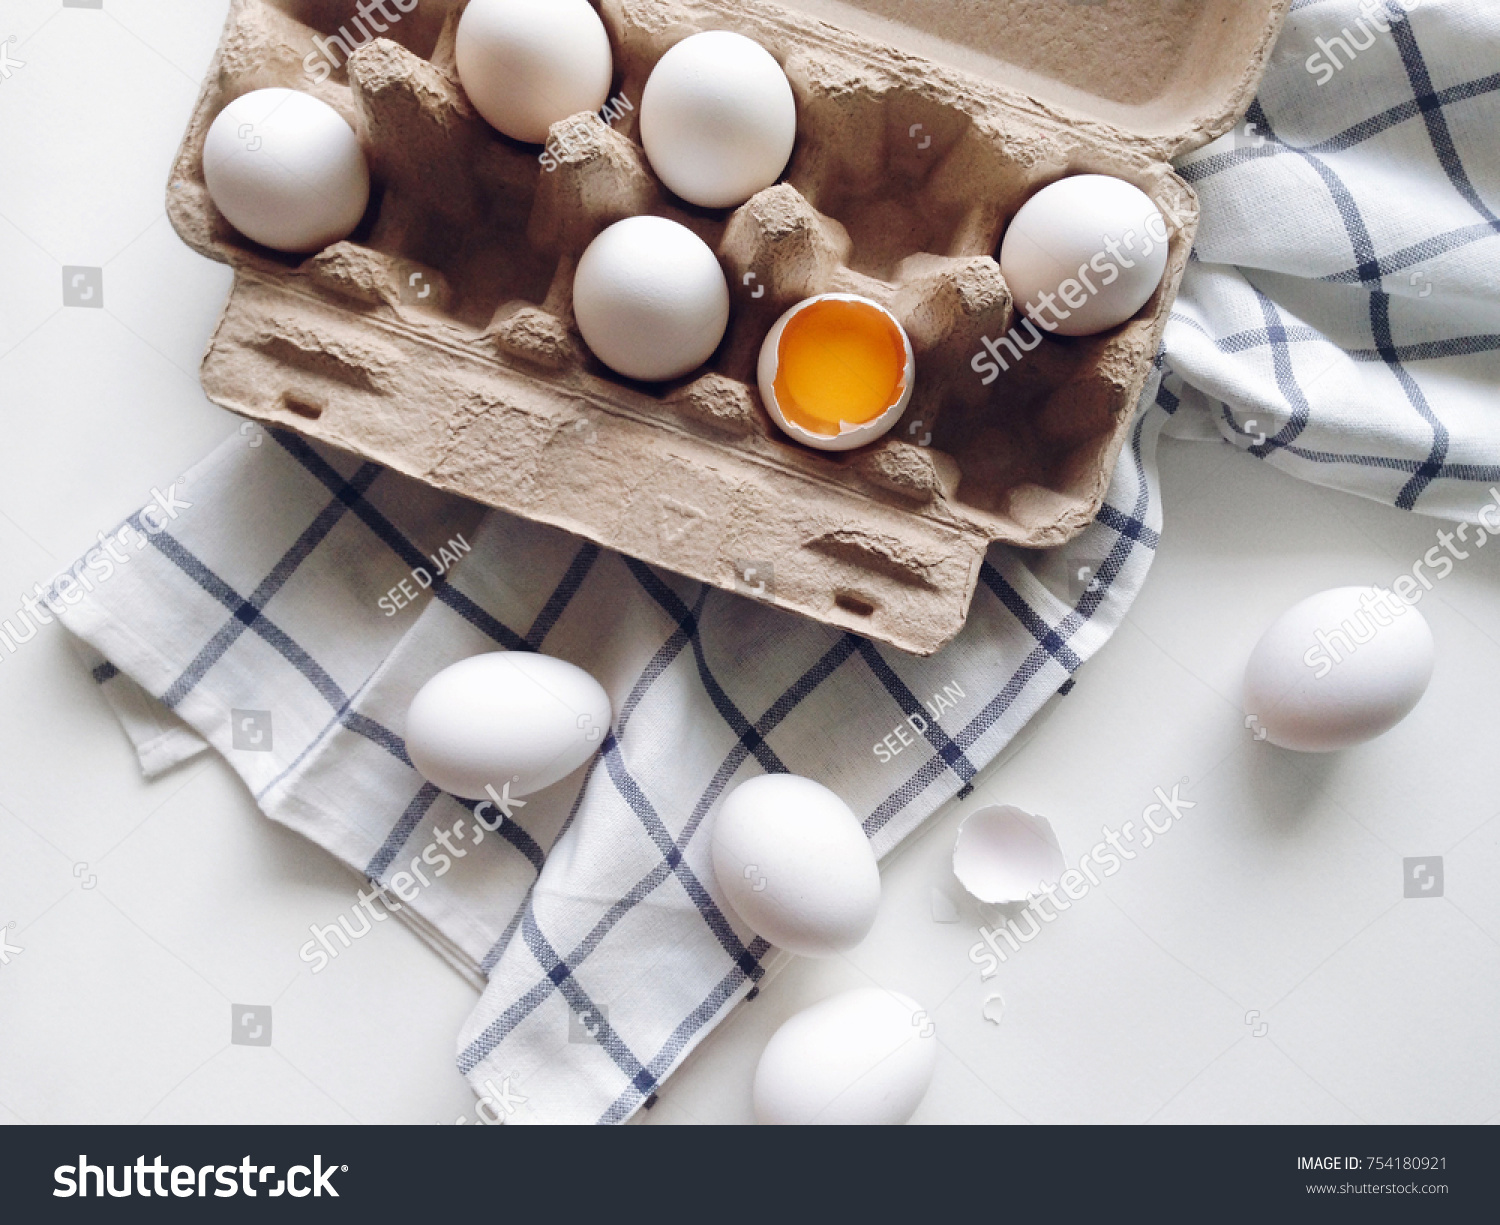 Organic white eggs in package on a kitchen table, egg yolk top view #754180921